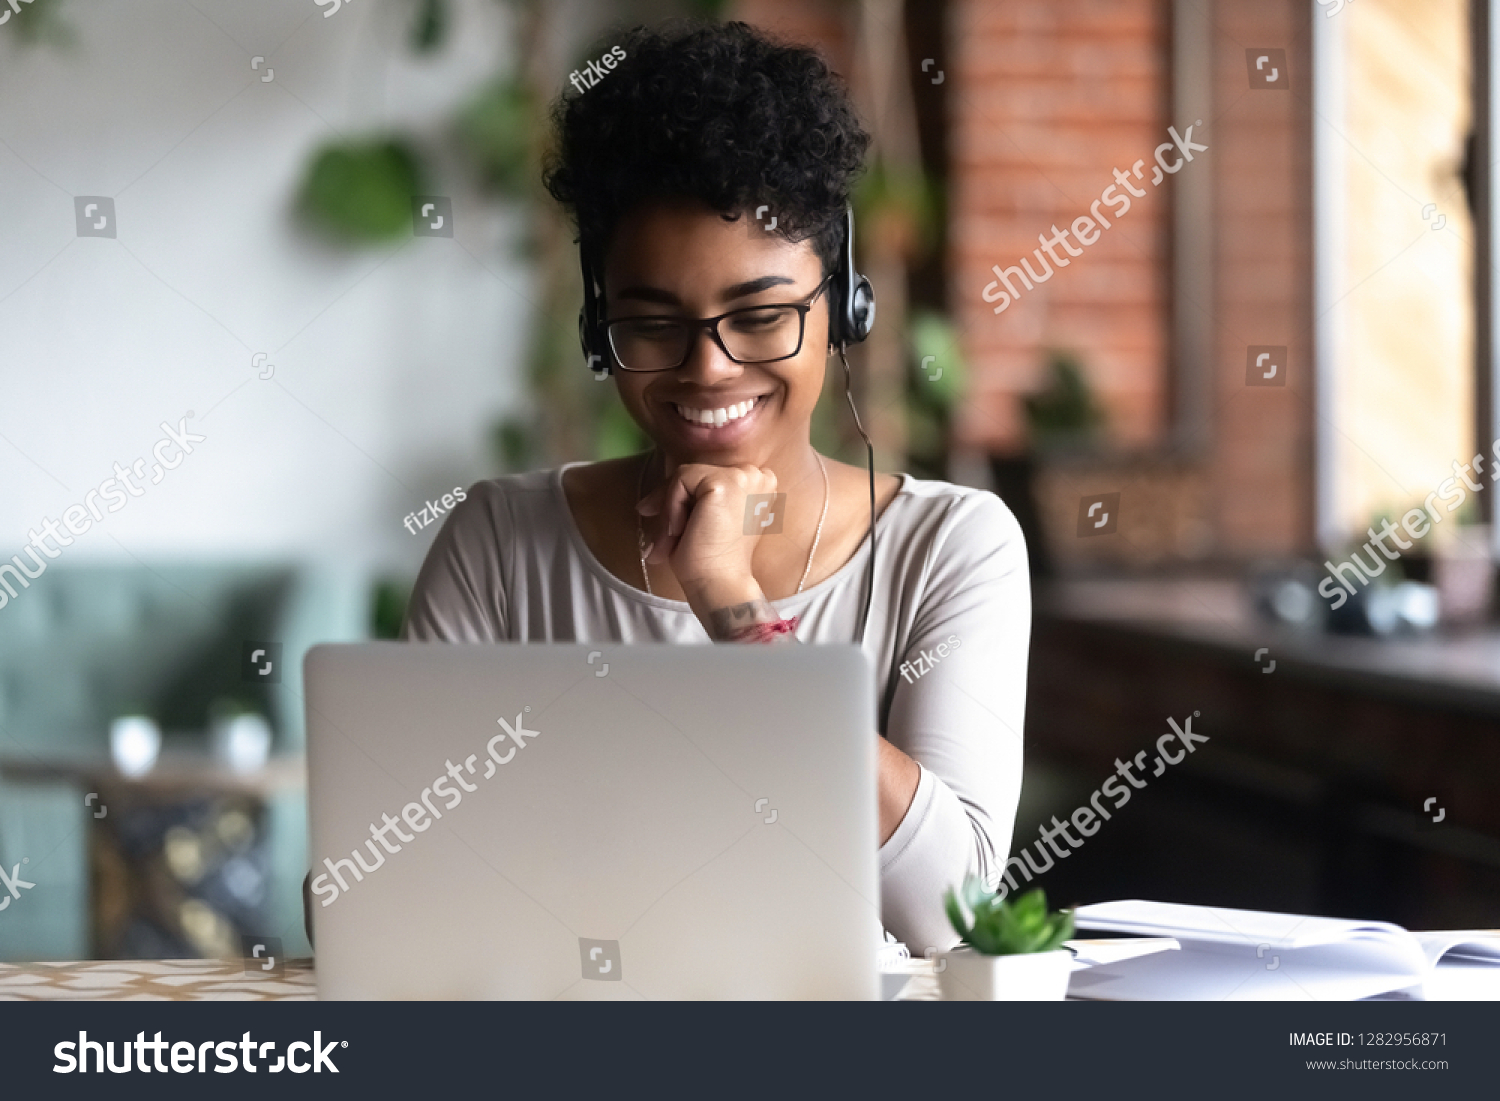 Black woman smart student girl sitting at table in university cafe alone wearing glasses looking at computer screen using headphones listening online lecture improve language skills having good mood #1282956871